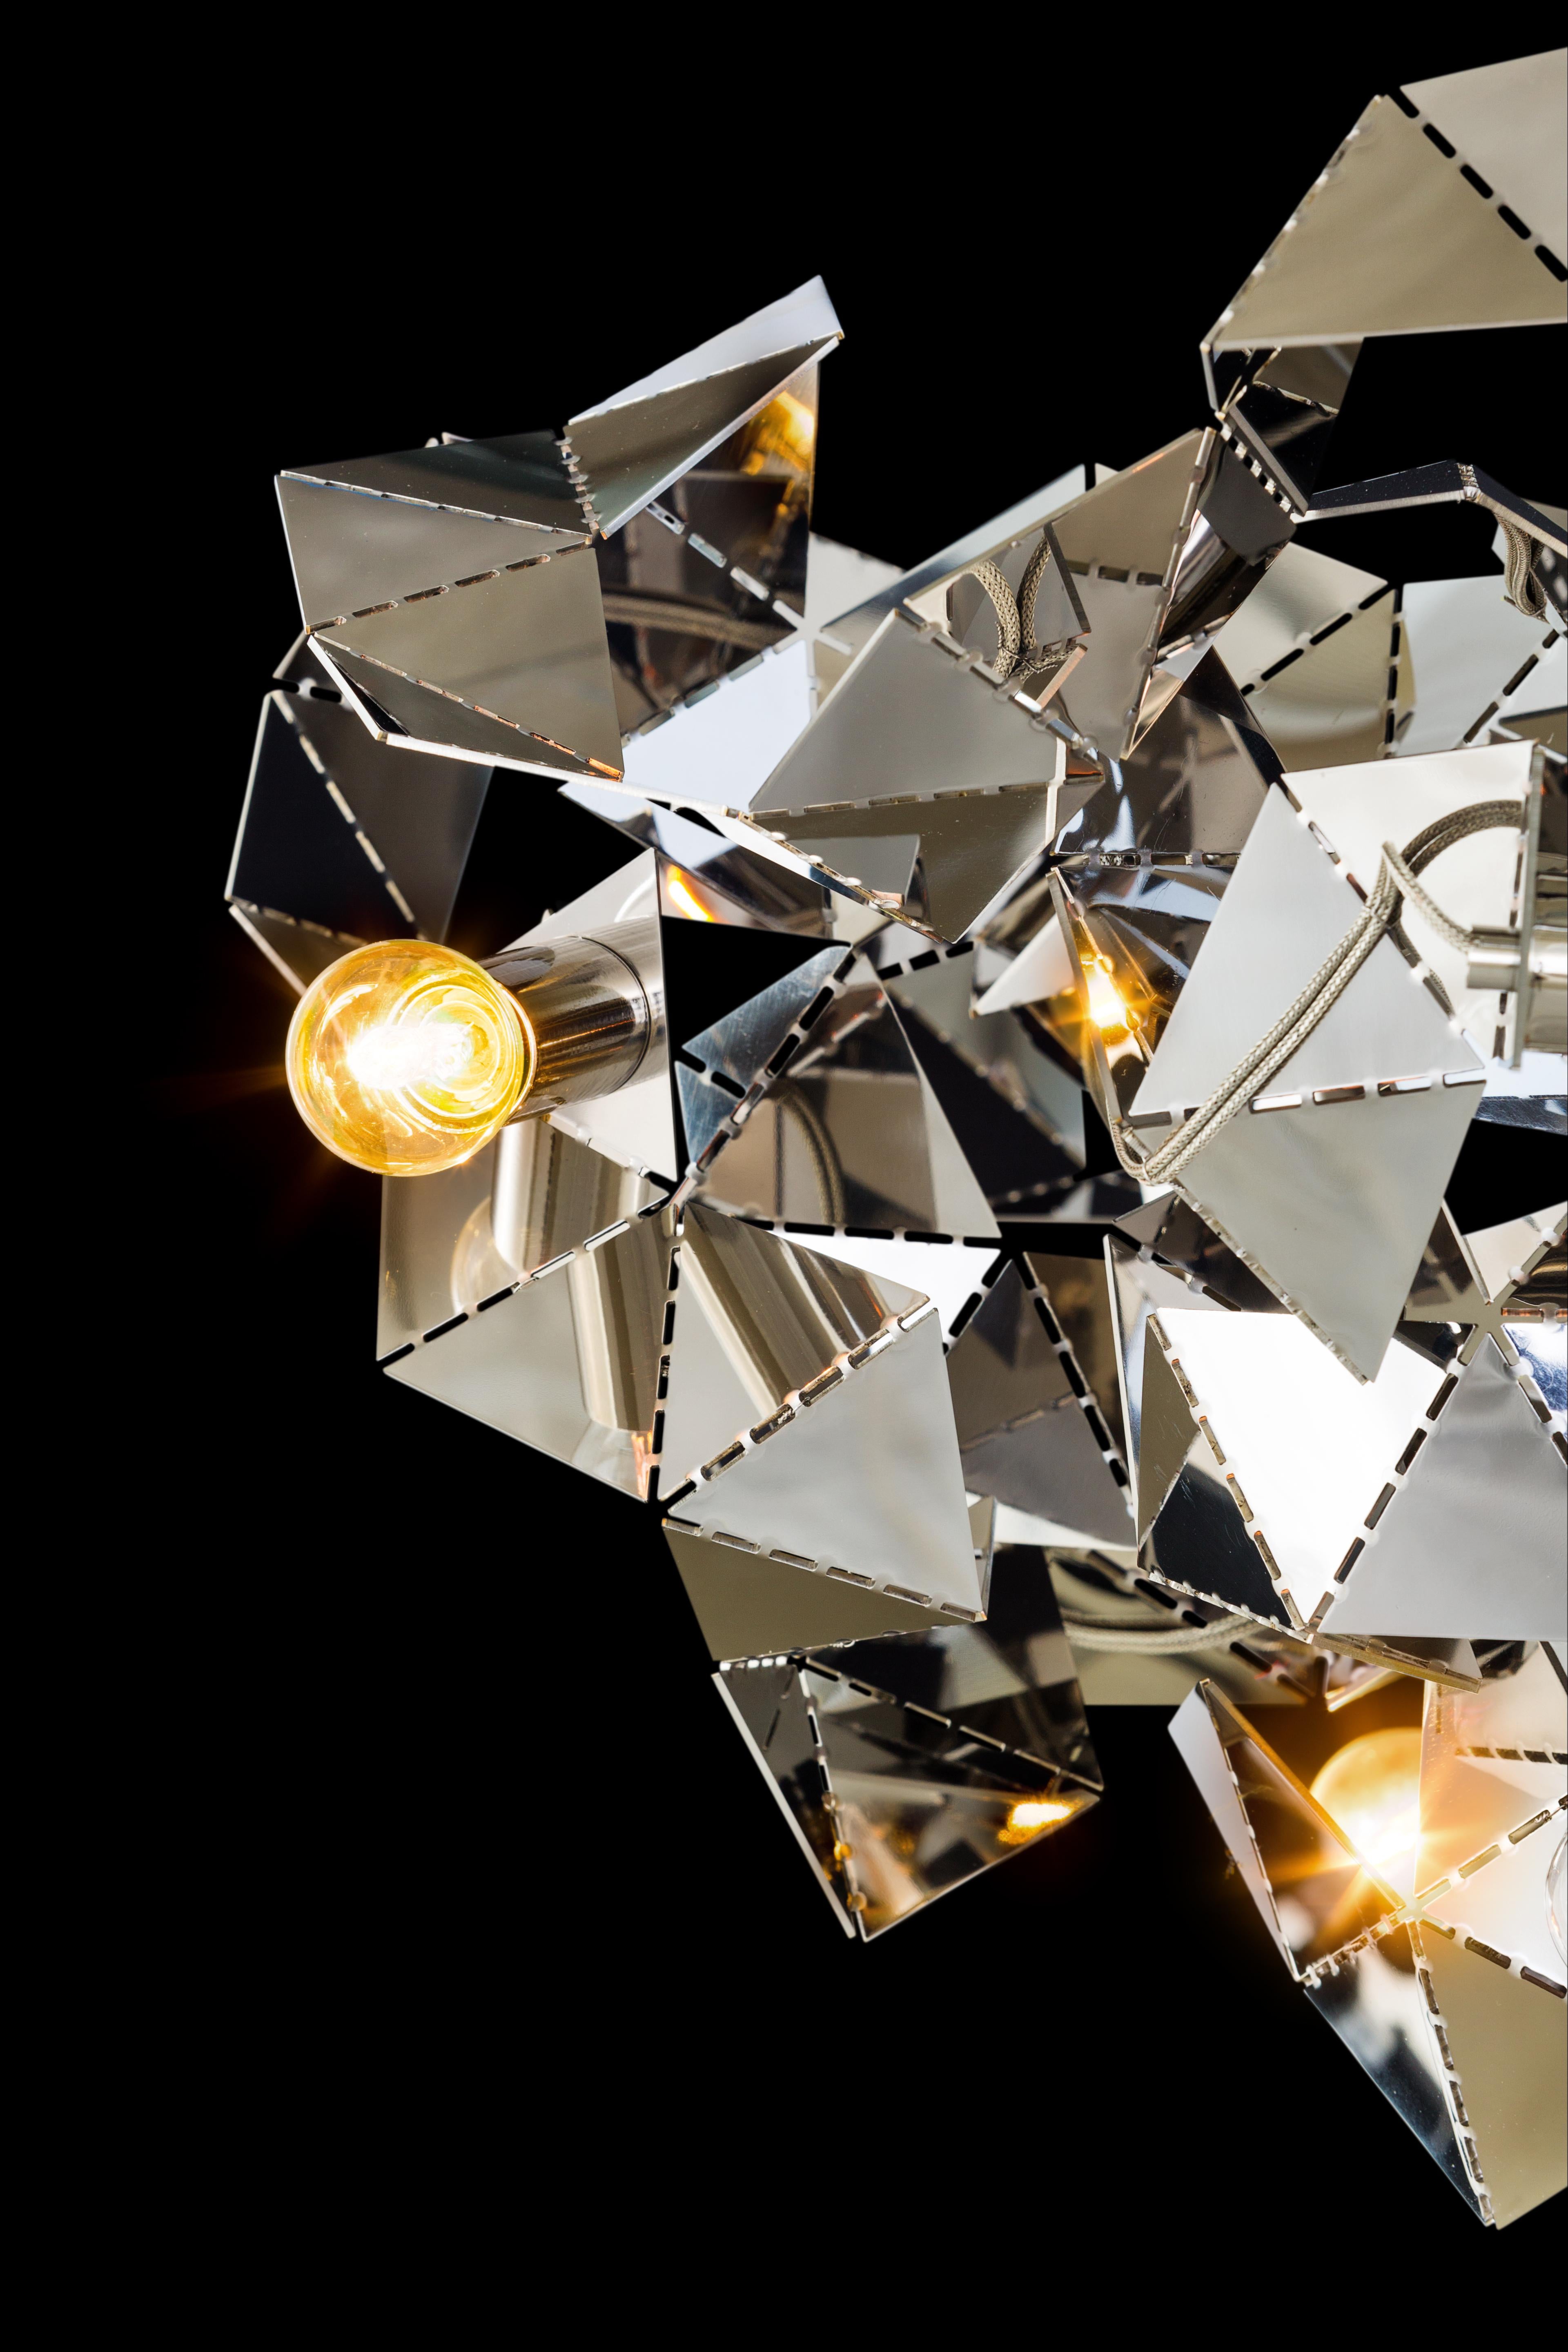 The Fractal, a modern chandelier in stainless steel, is designed by William Brand, founder of Brand van Egmond. The play between the unexpected geometry of the surfaces and the characteristics of the metal changes the light from every point of view.